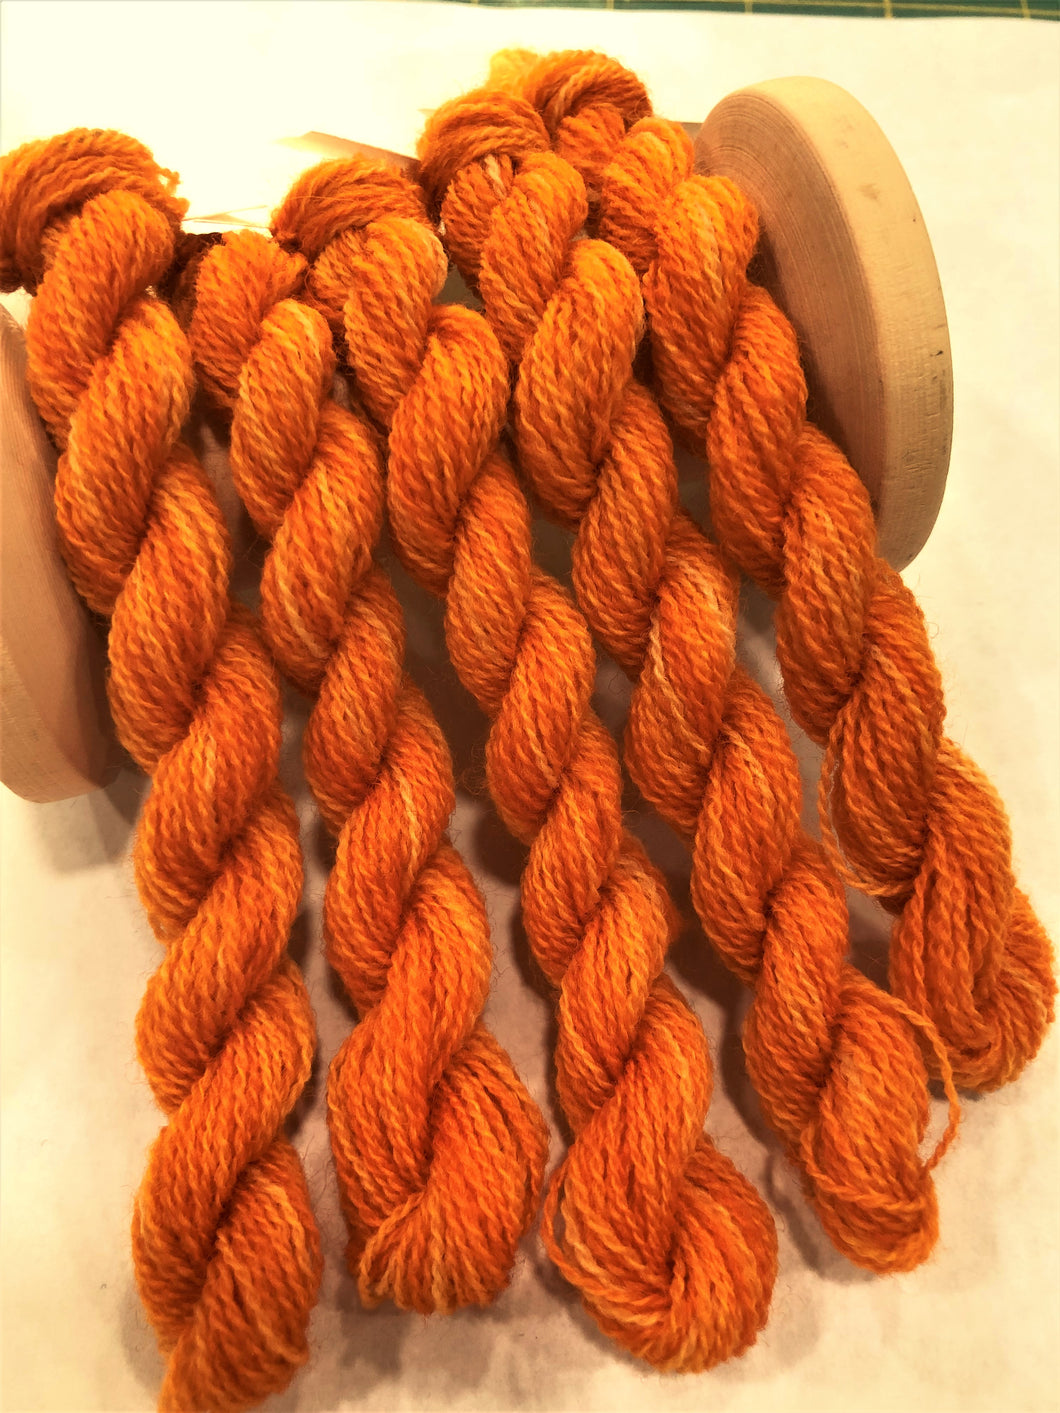 Hand dyed wool thread in a variegated oranges from yelllowish orange to a medium orange.